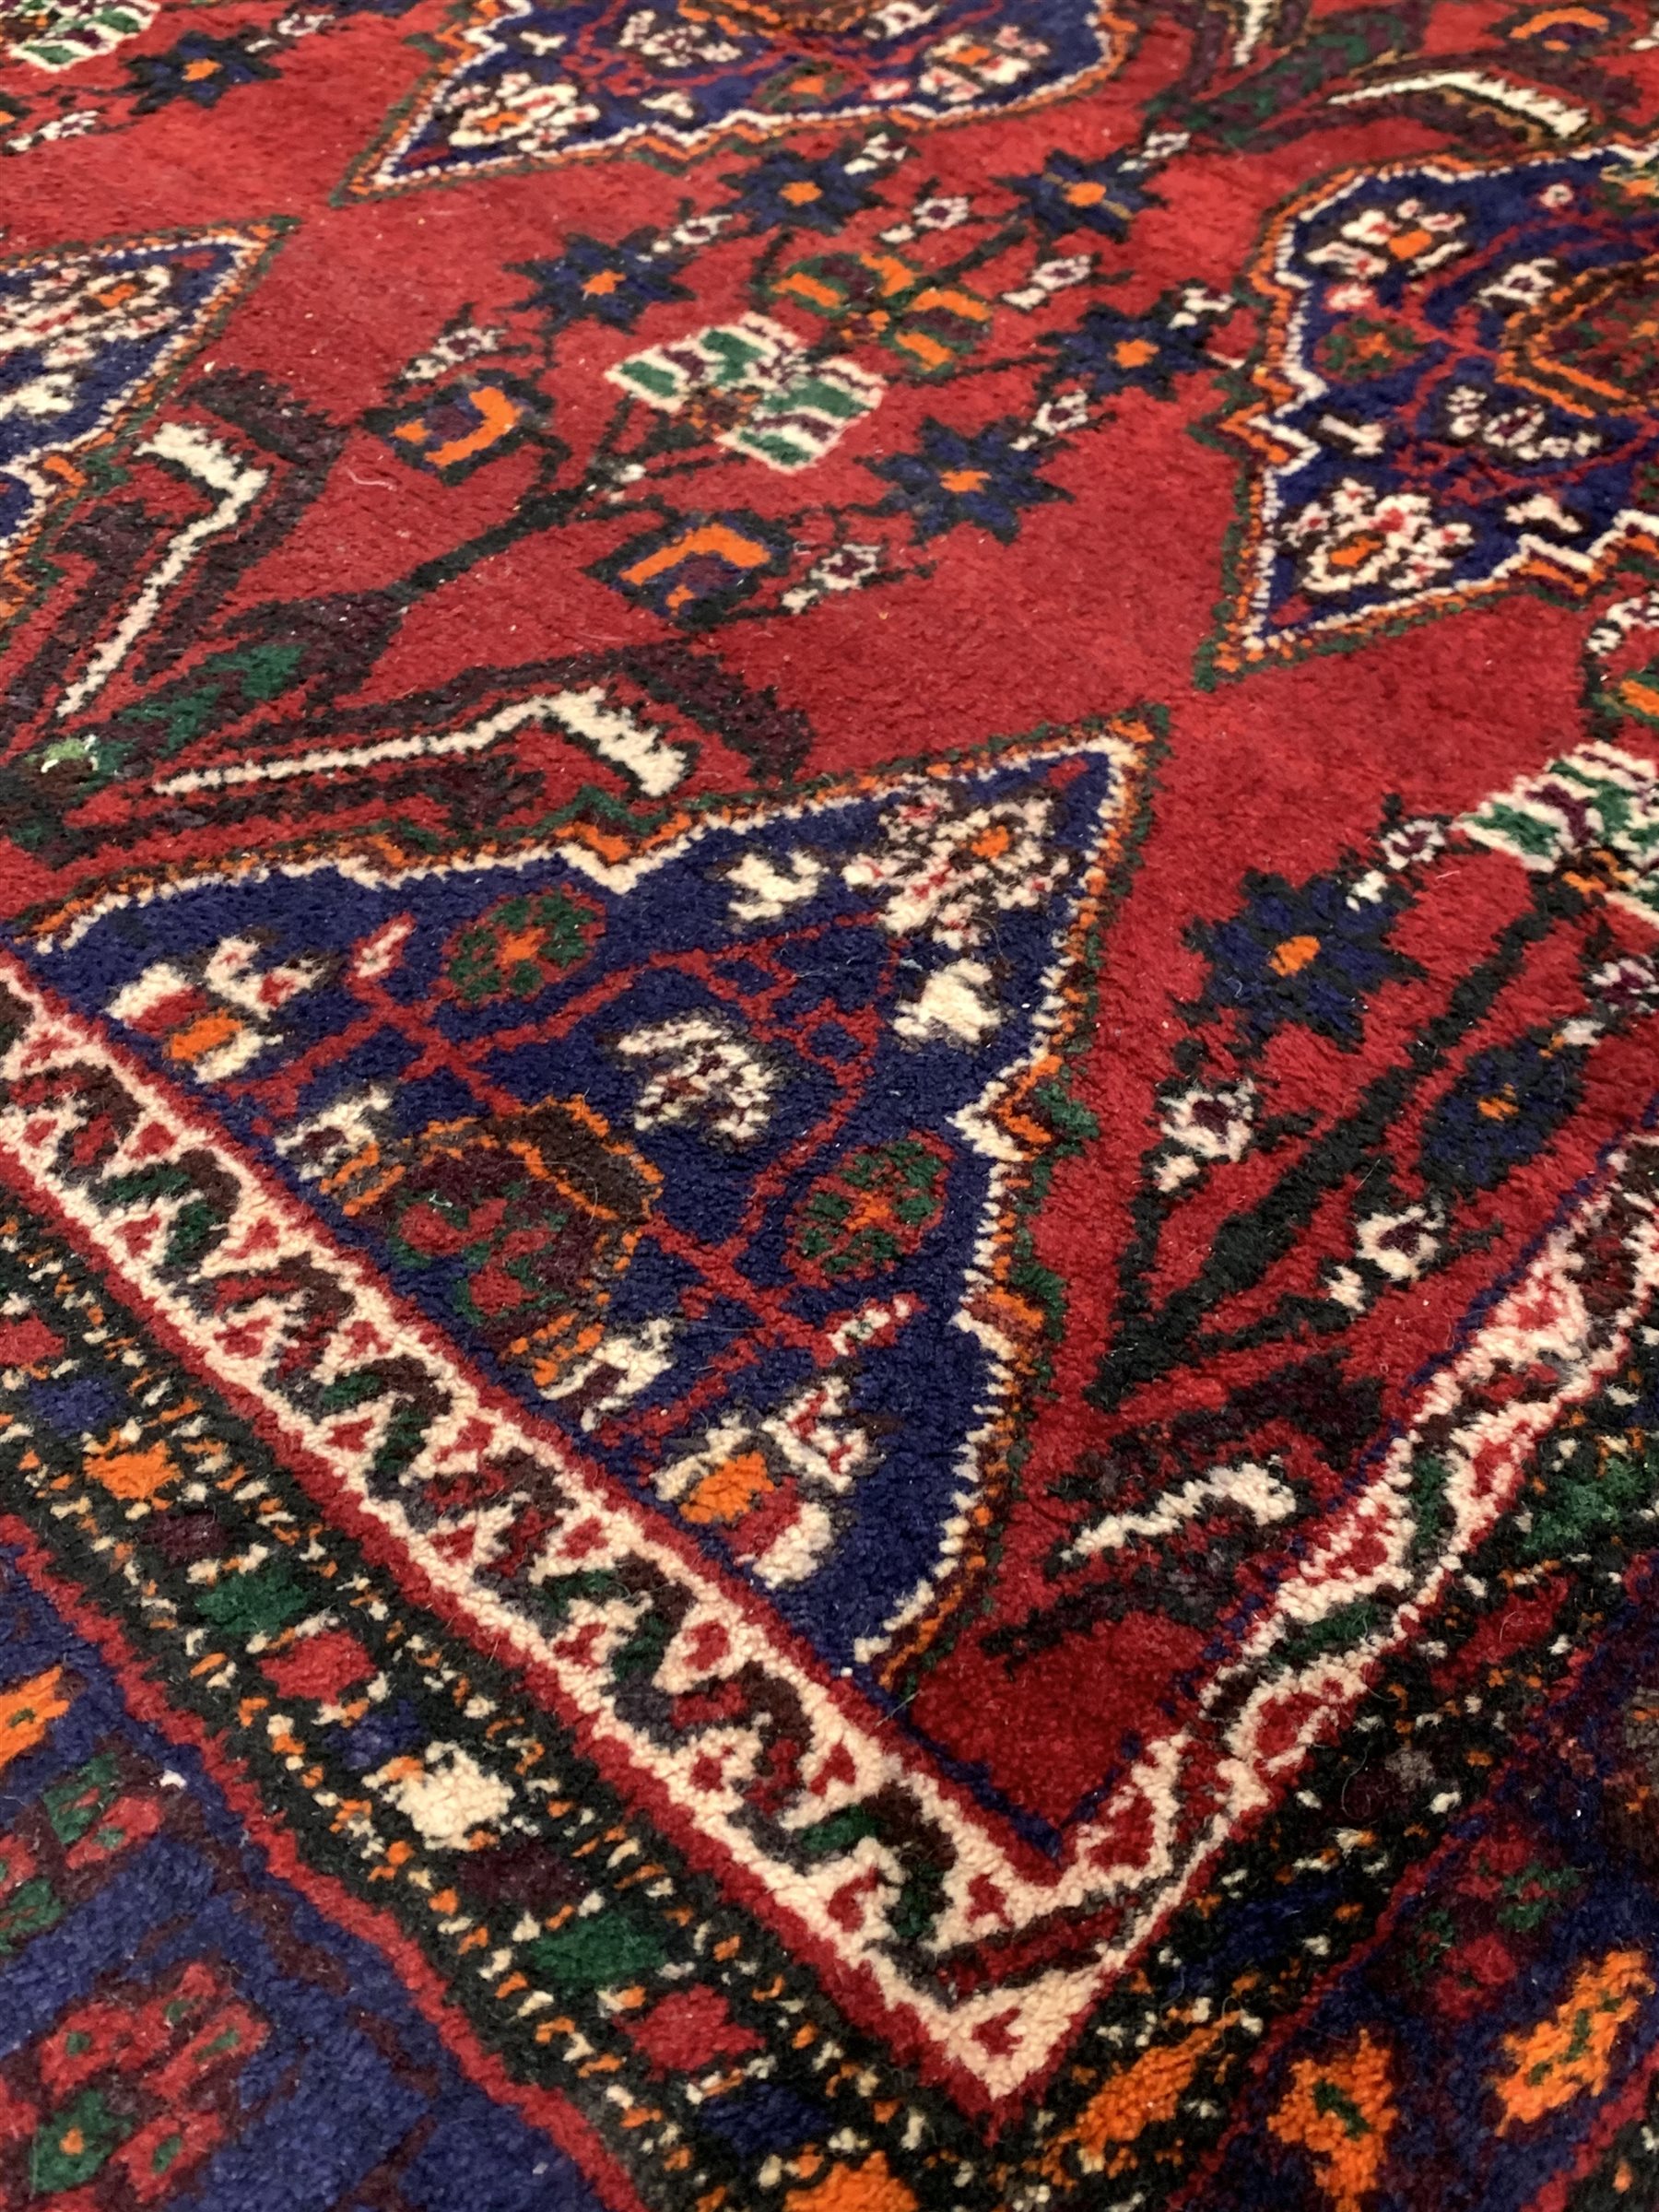 Iranian Neynz rug, red ground with multiple stylised lozenge decorated field - Image 2 of 3